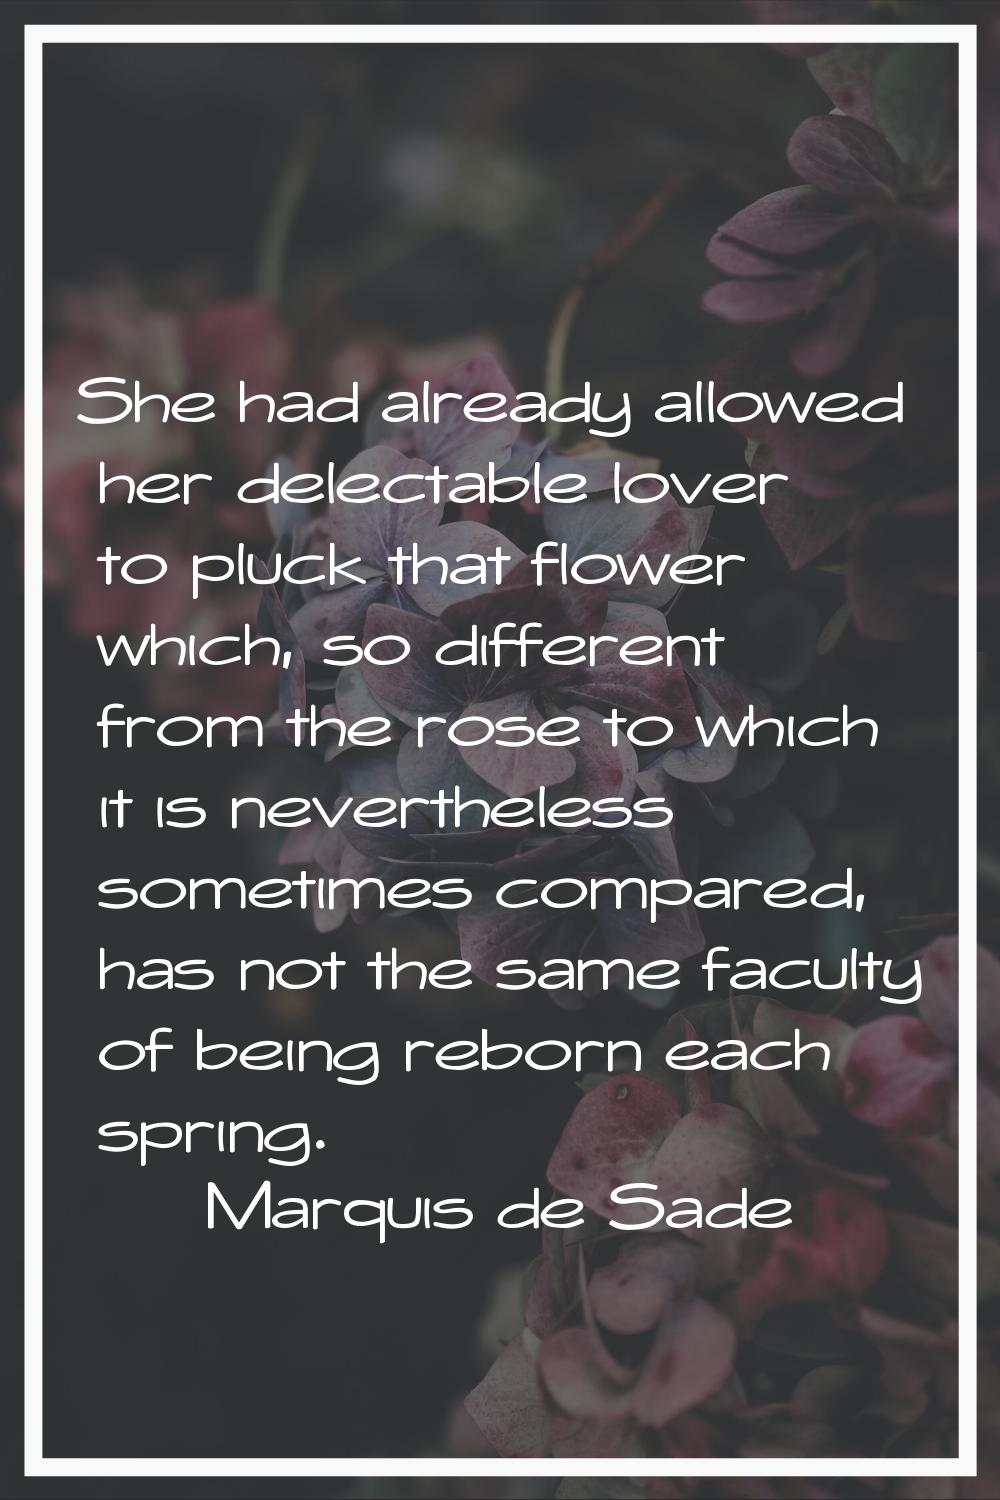 She had already allowed her delectable lover to pluck that flower which, so different from the rose